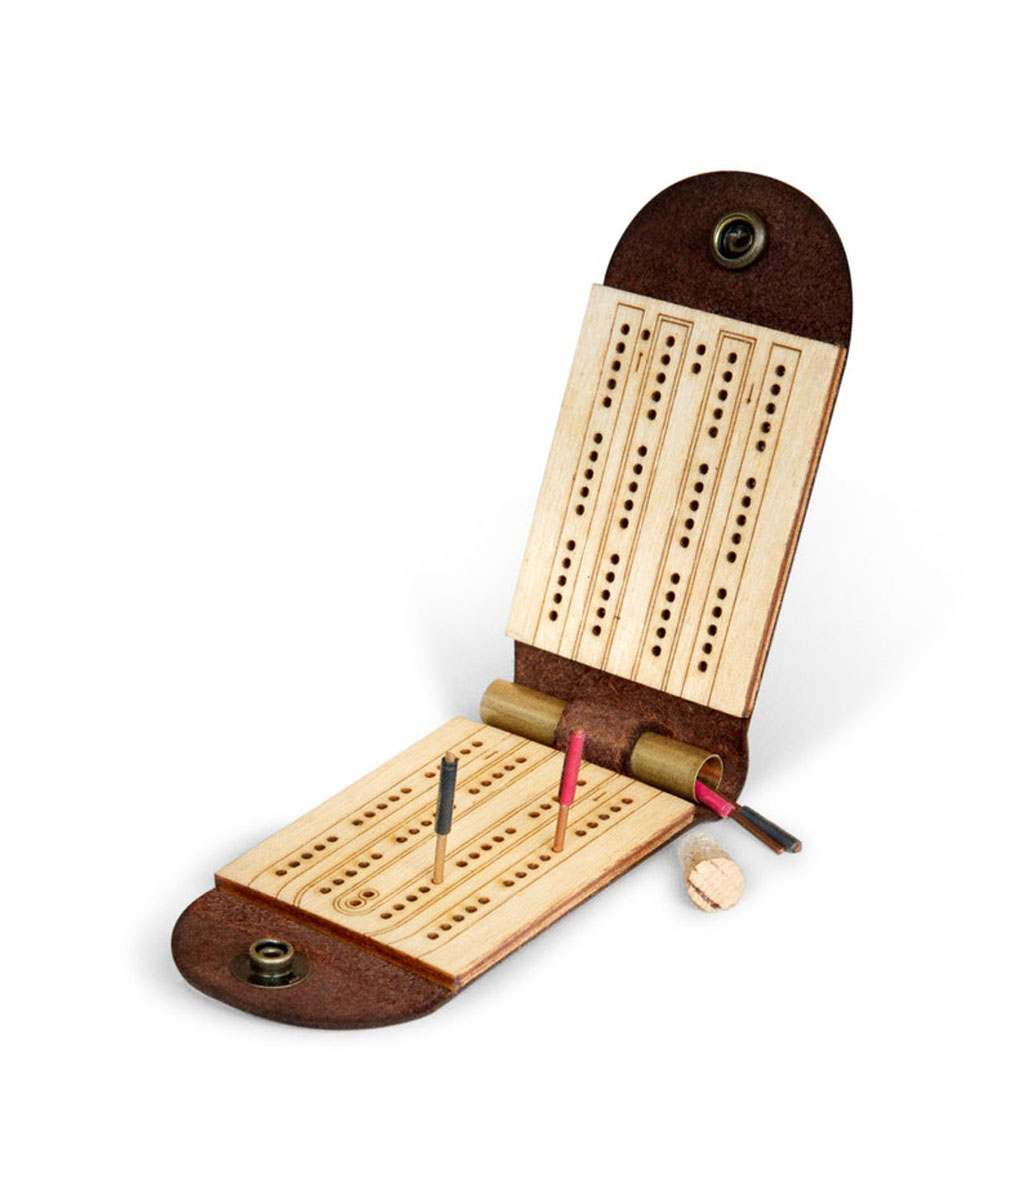 travel cribbage game, a creative travel gift for game lovers